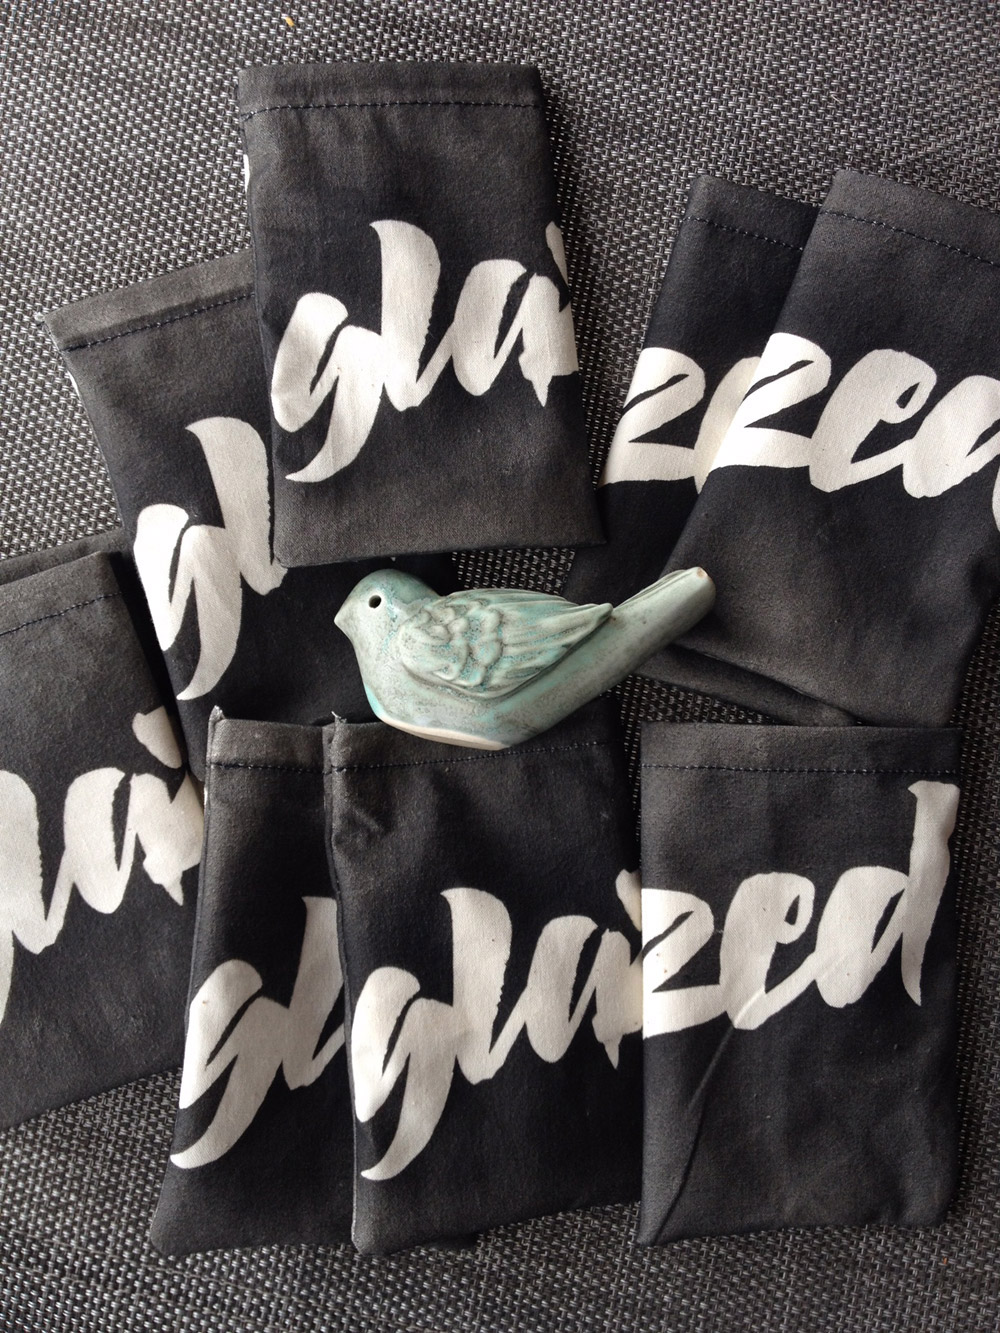 Denver artist Kinsey Zaïre has crafted a sparrow pipe for her line dubbed "Glazed." (Provided by Kinsey Zaïre Studio)